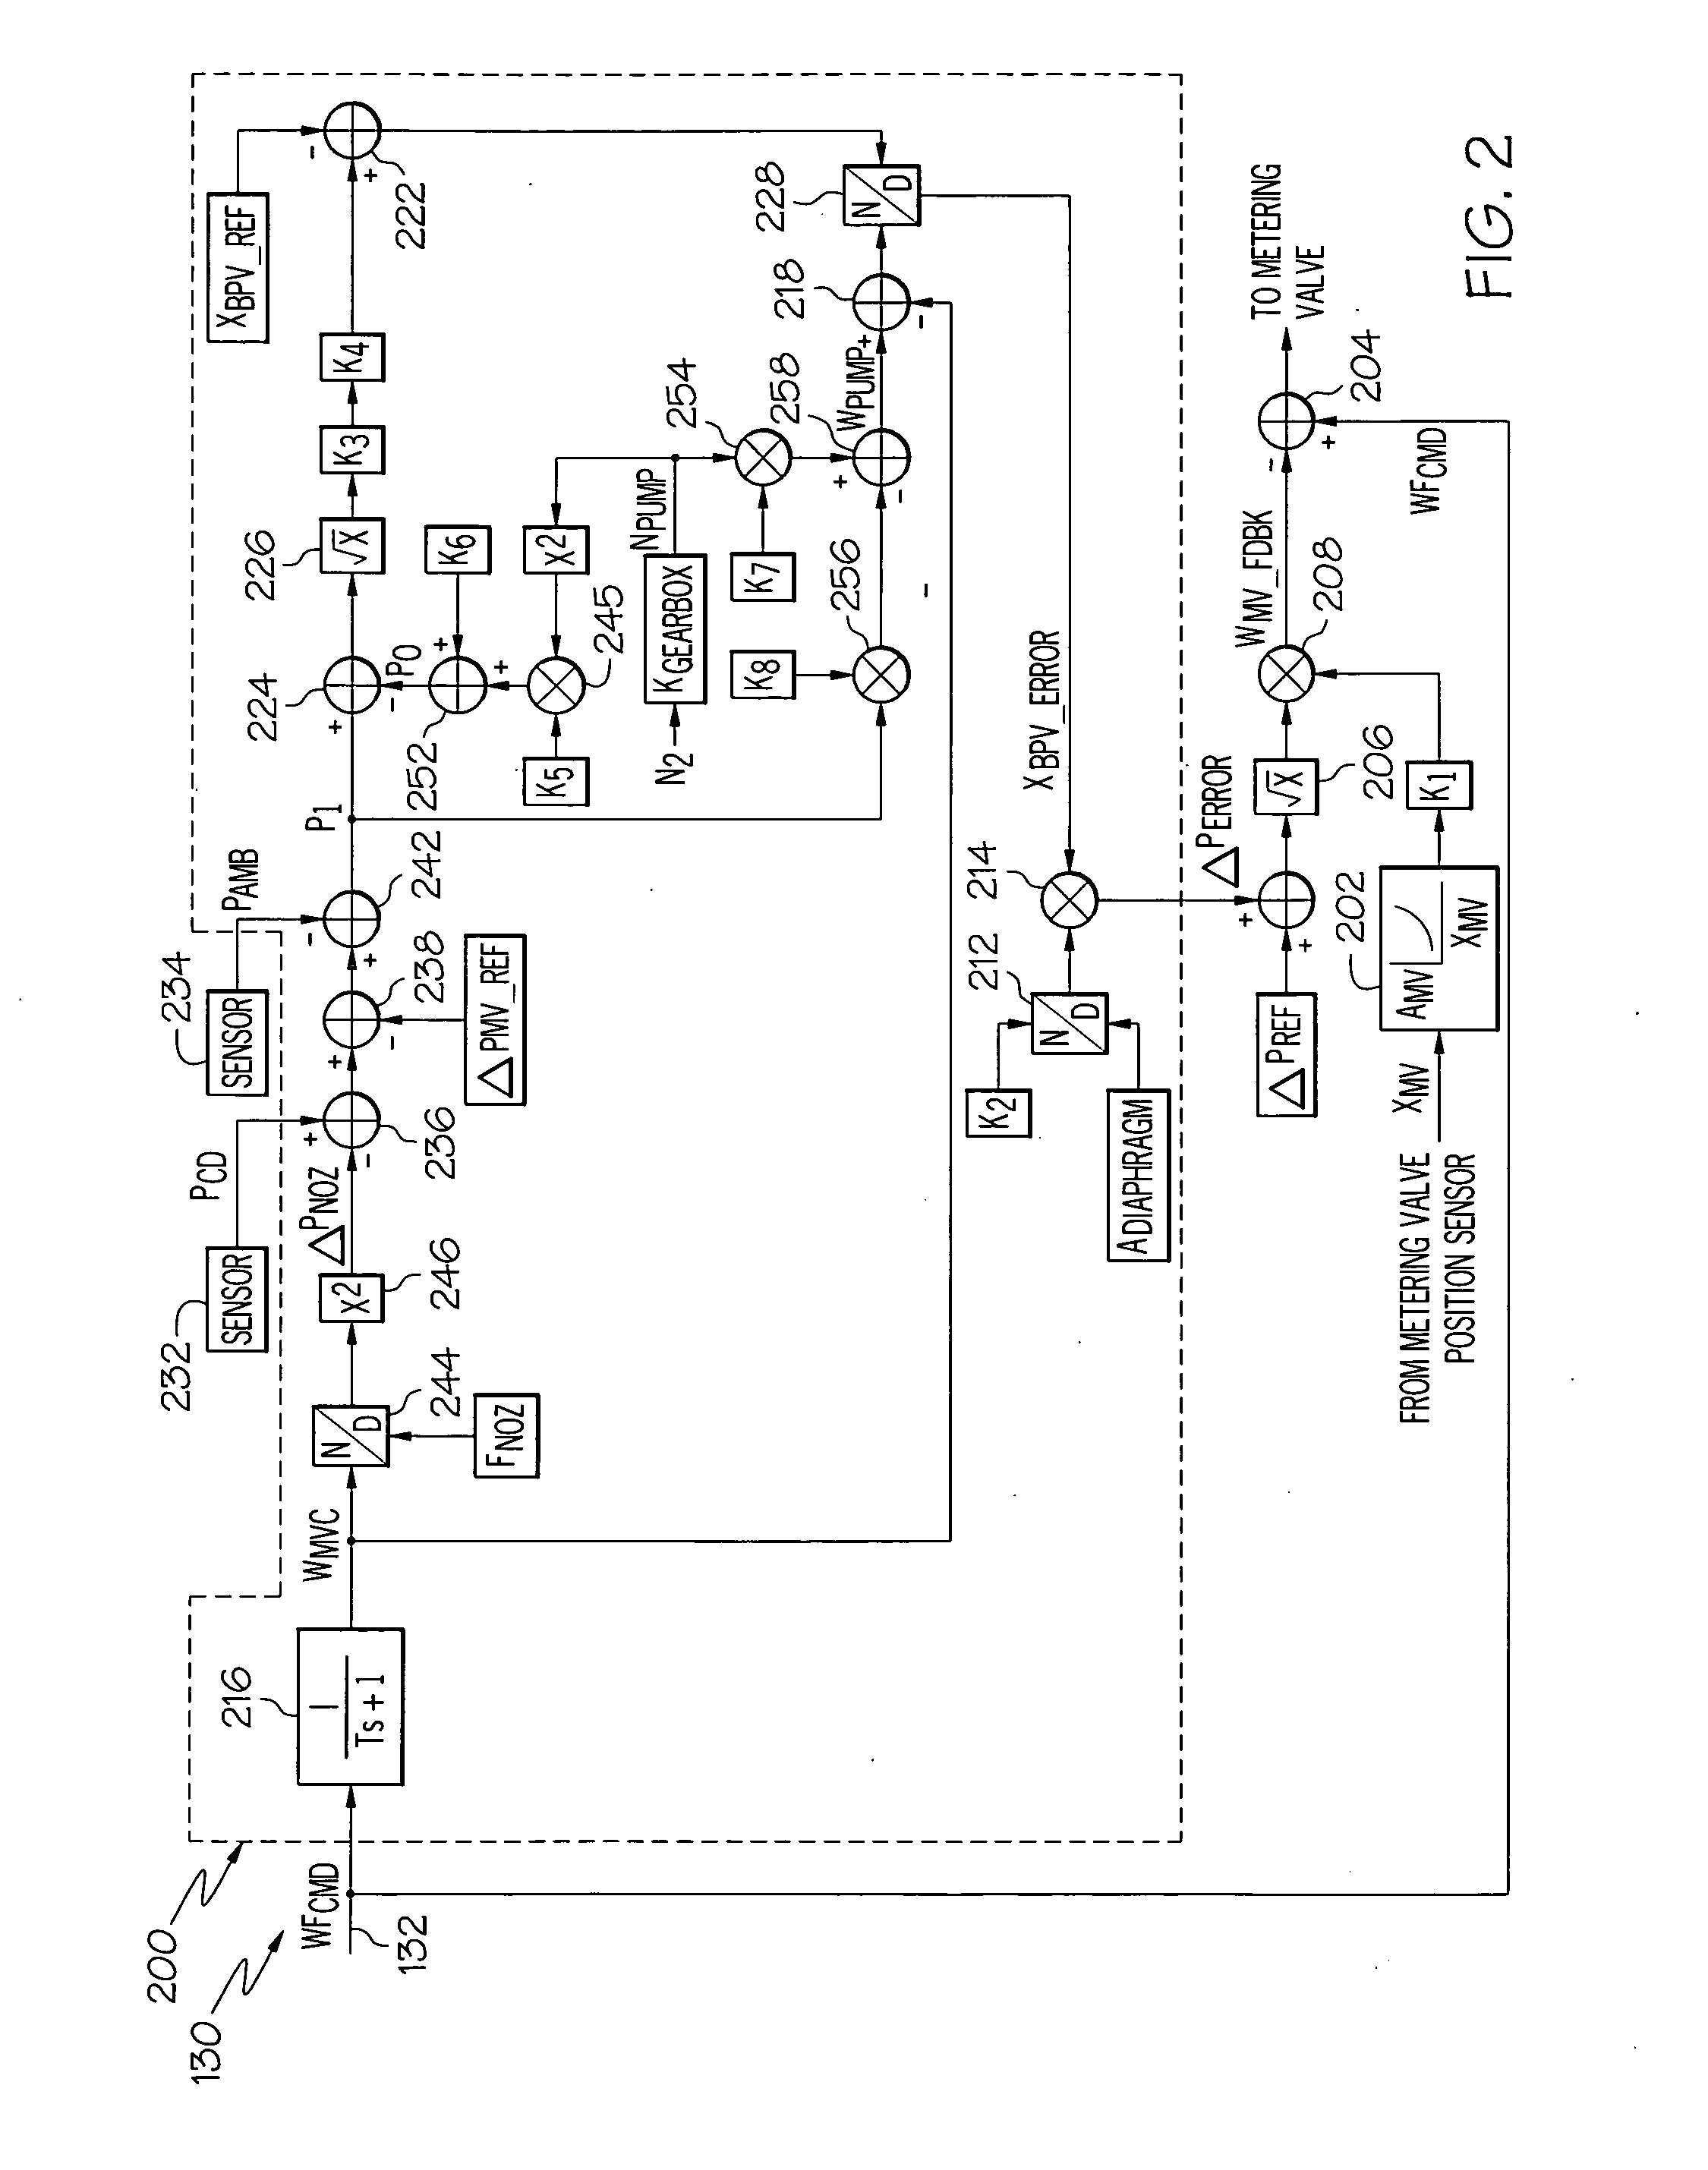 Fuel metering system proportional bypass valve error compensation system and method